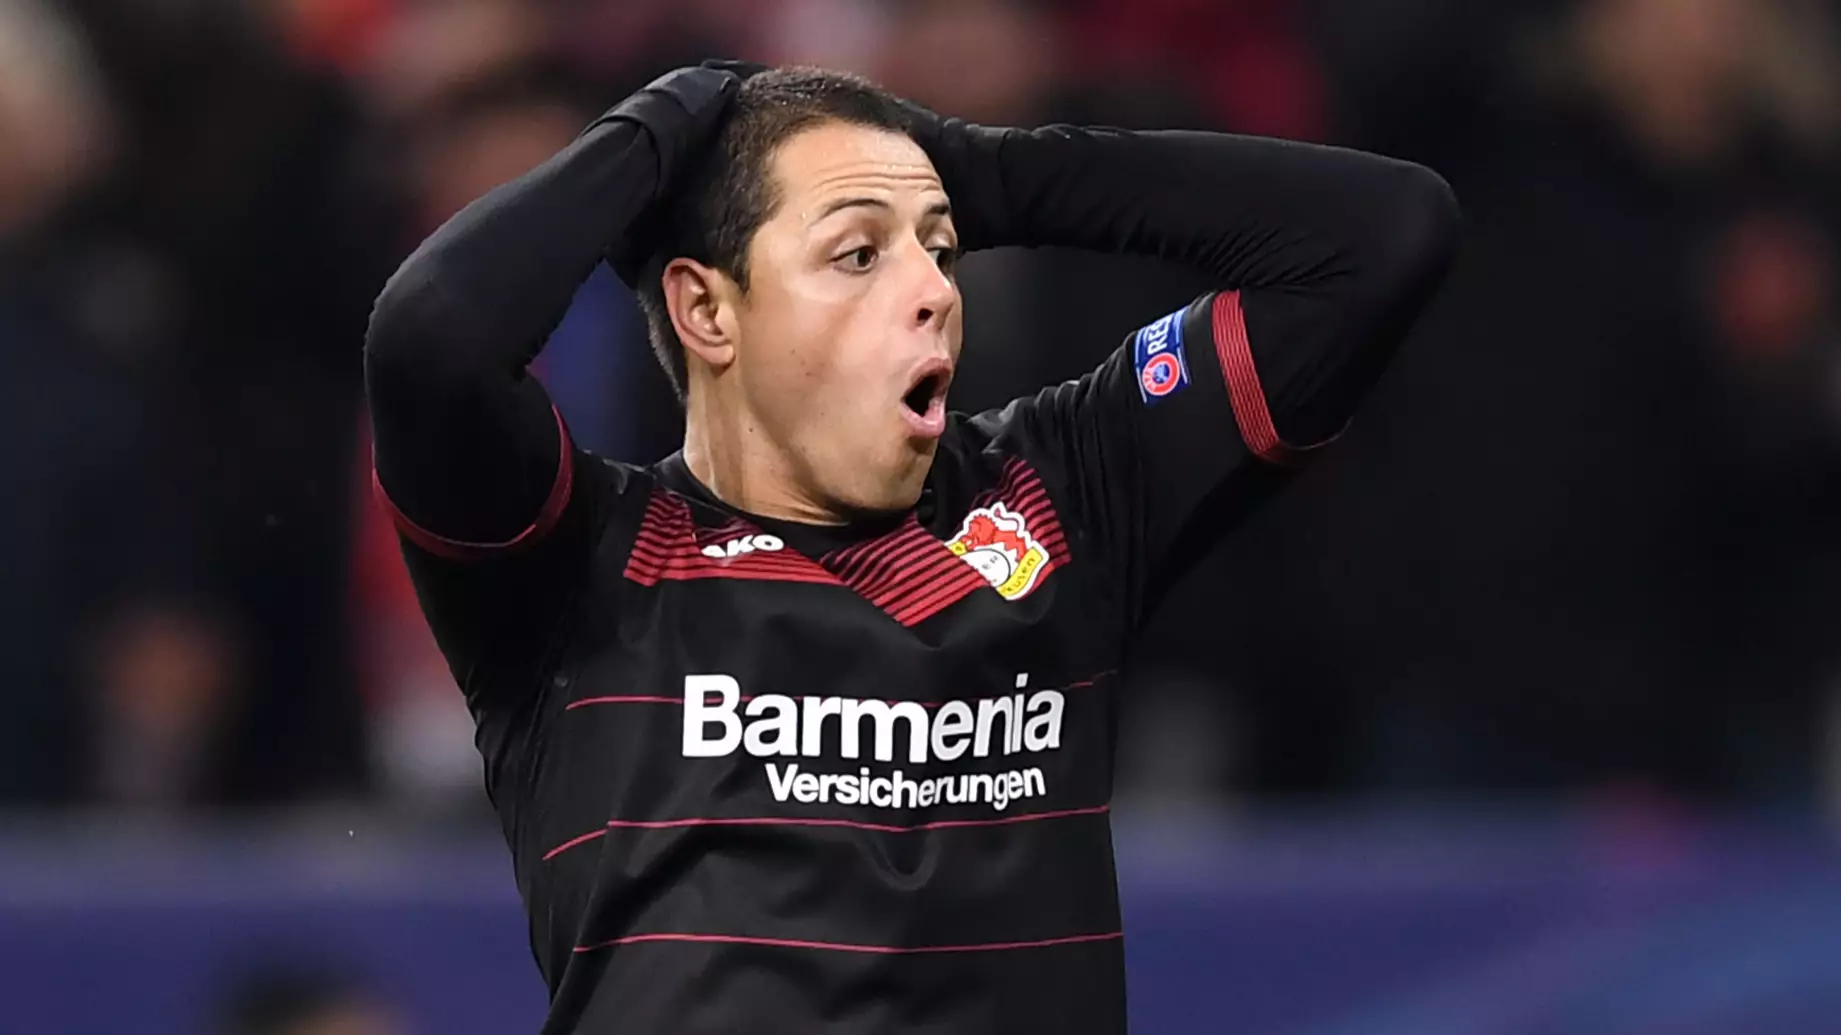 Jose Mourinho Hints At Old Trafford Return For Chicharito